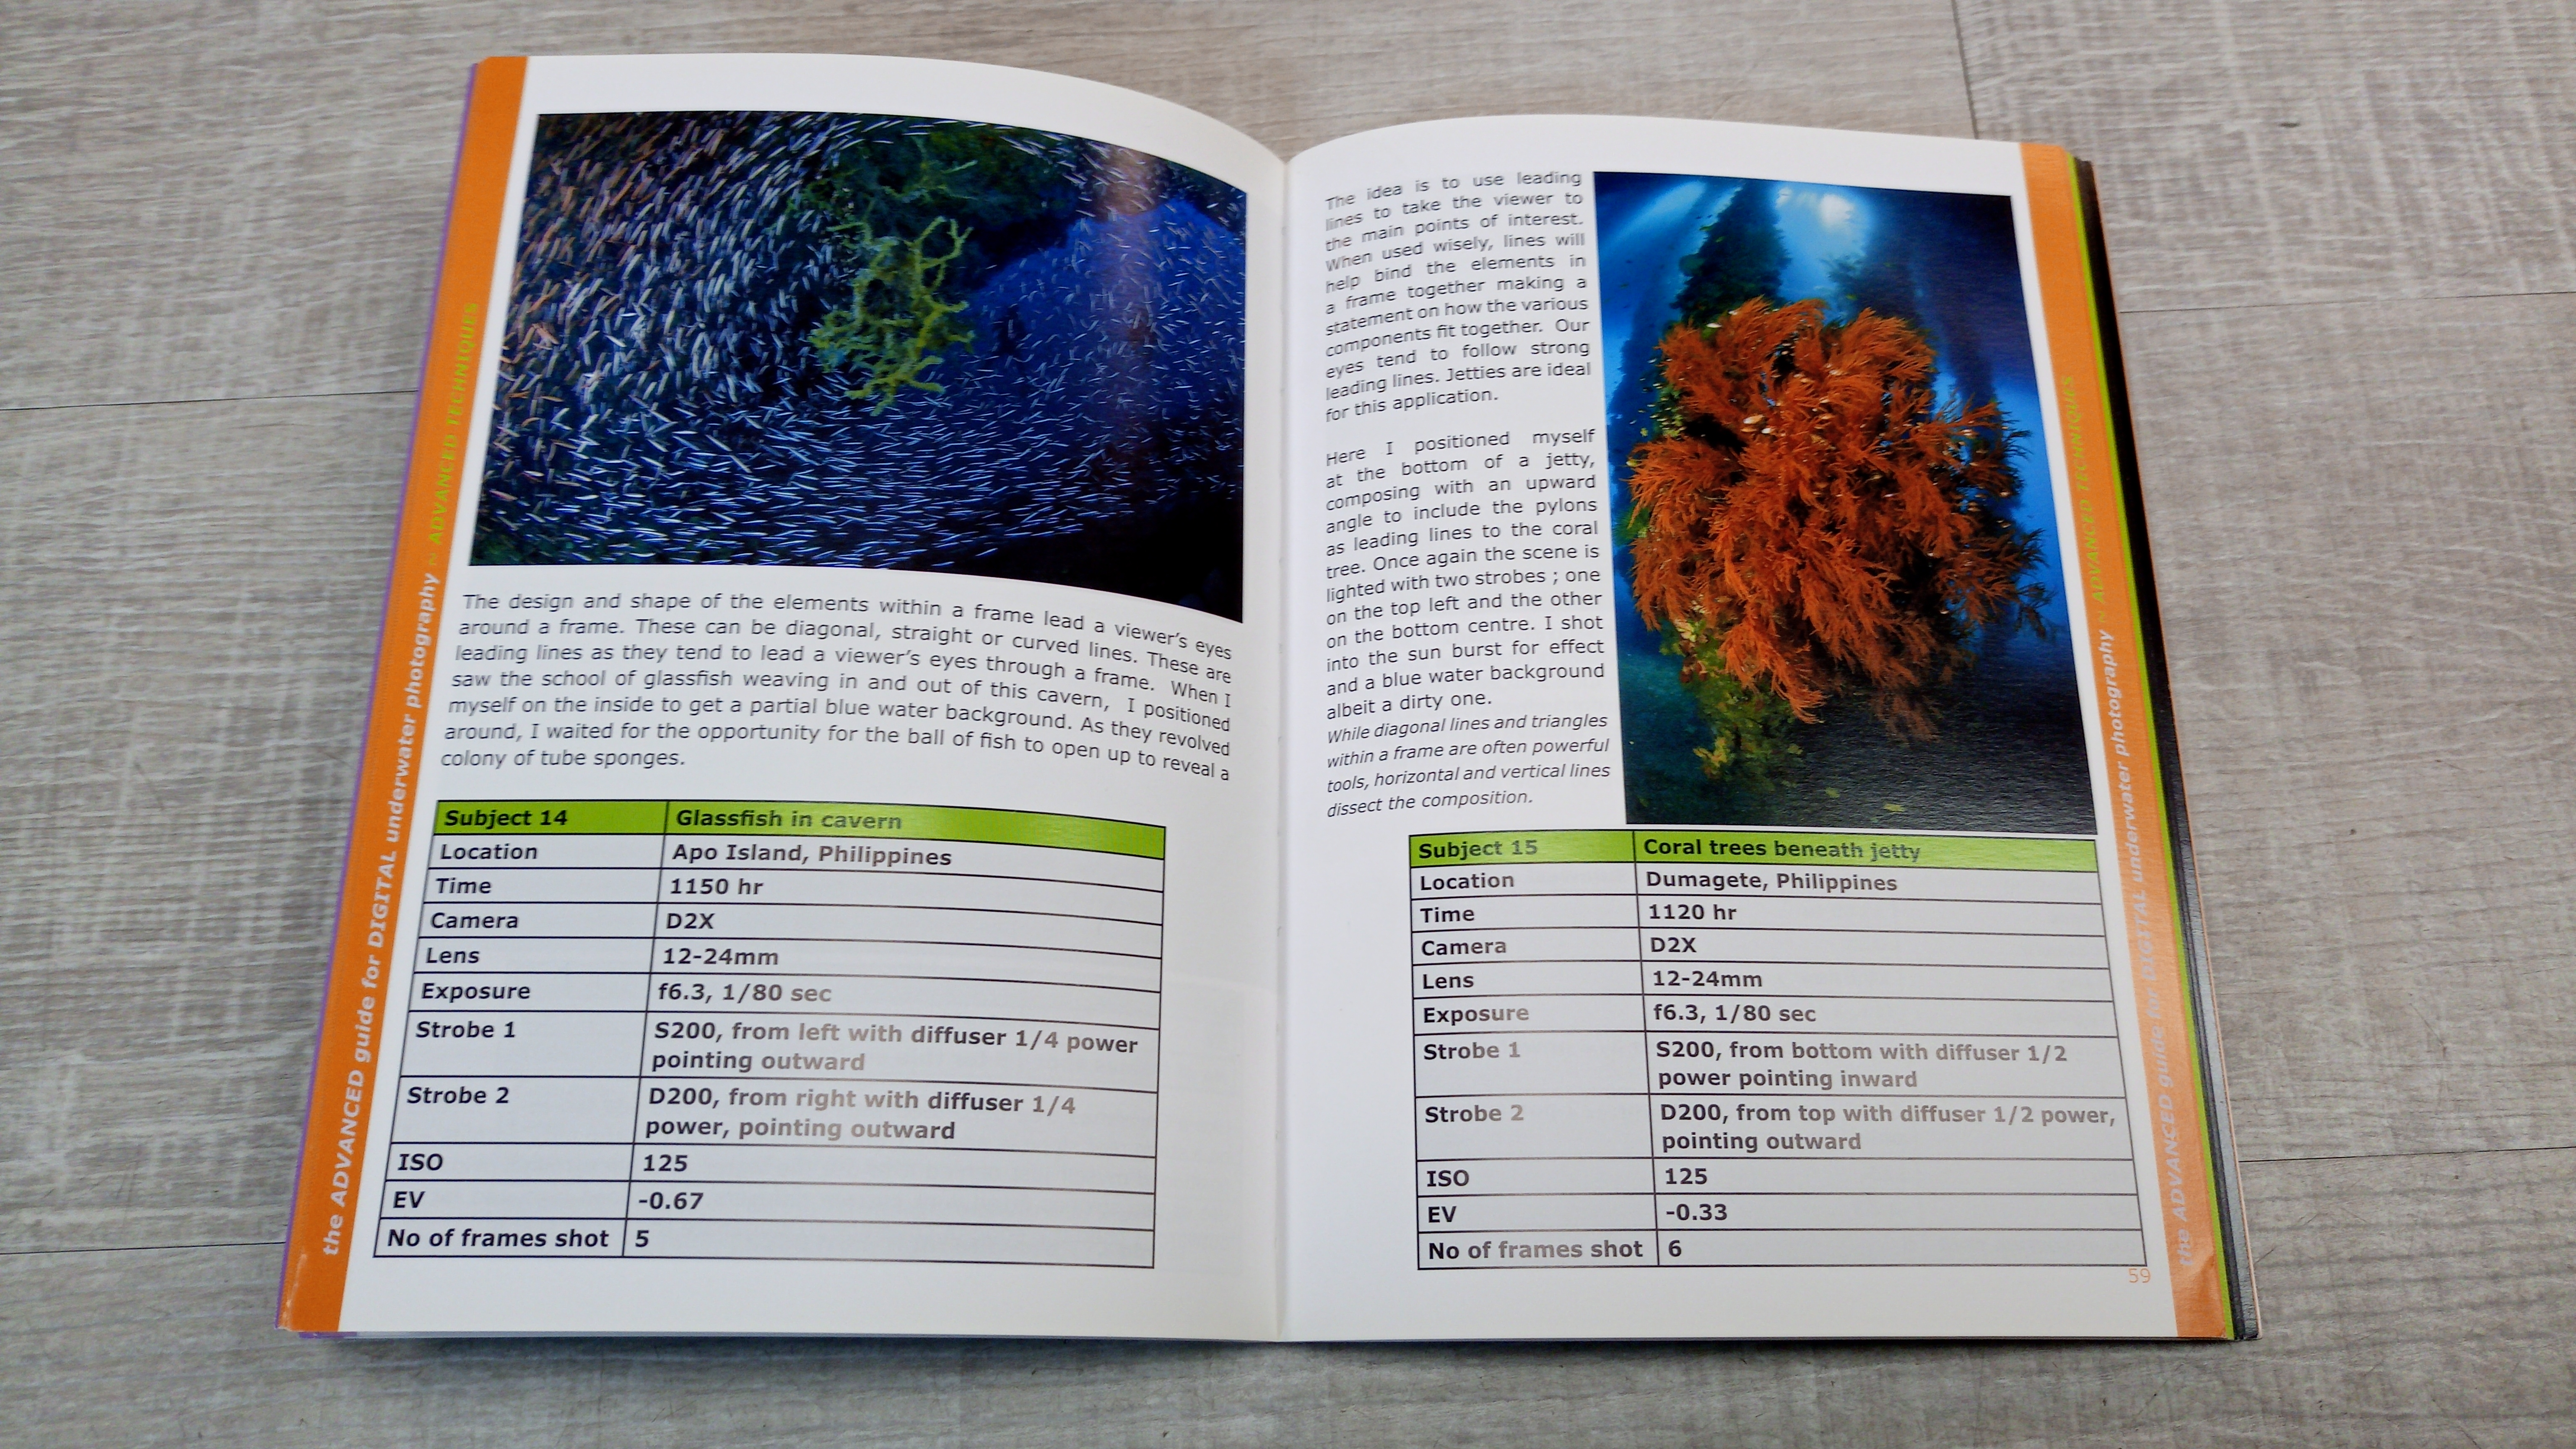 An Advanced Guide to Digital Underwater Photography